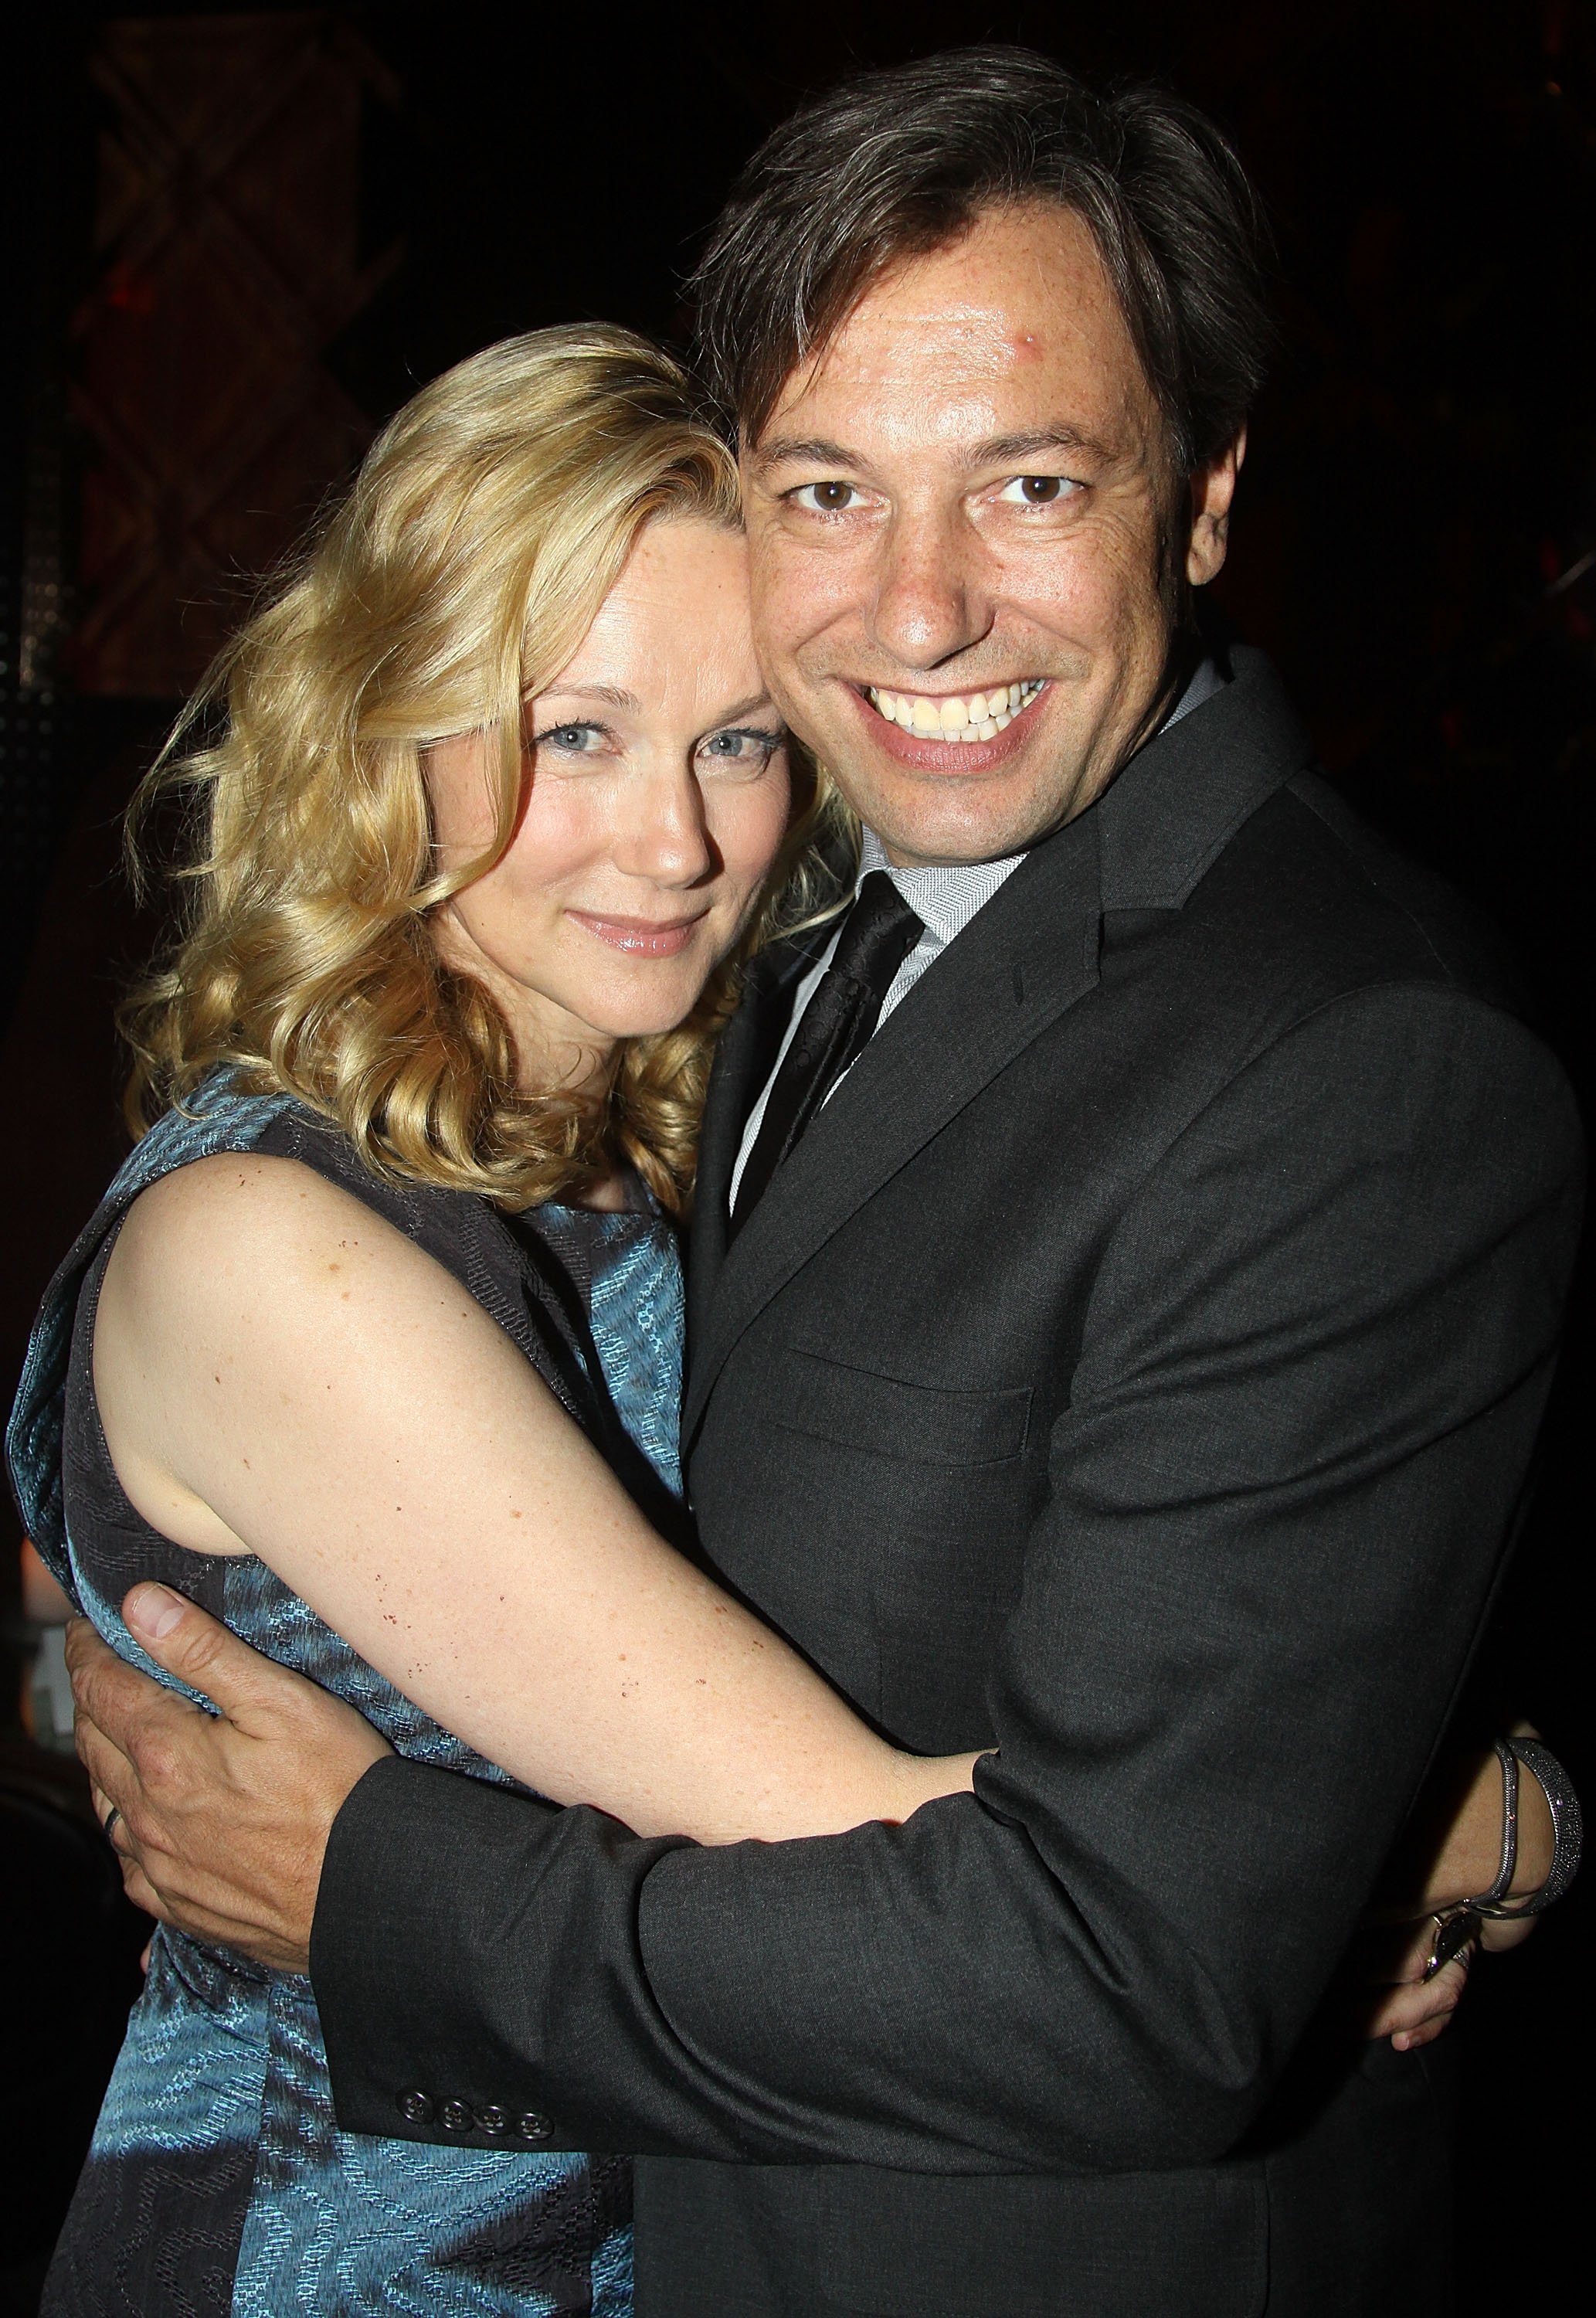 Laura Linney and Marc Schauer at the Opening Night after party for "Time Stands Still" on October 7, 2010, in New York. | Source: Getty Images